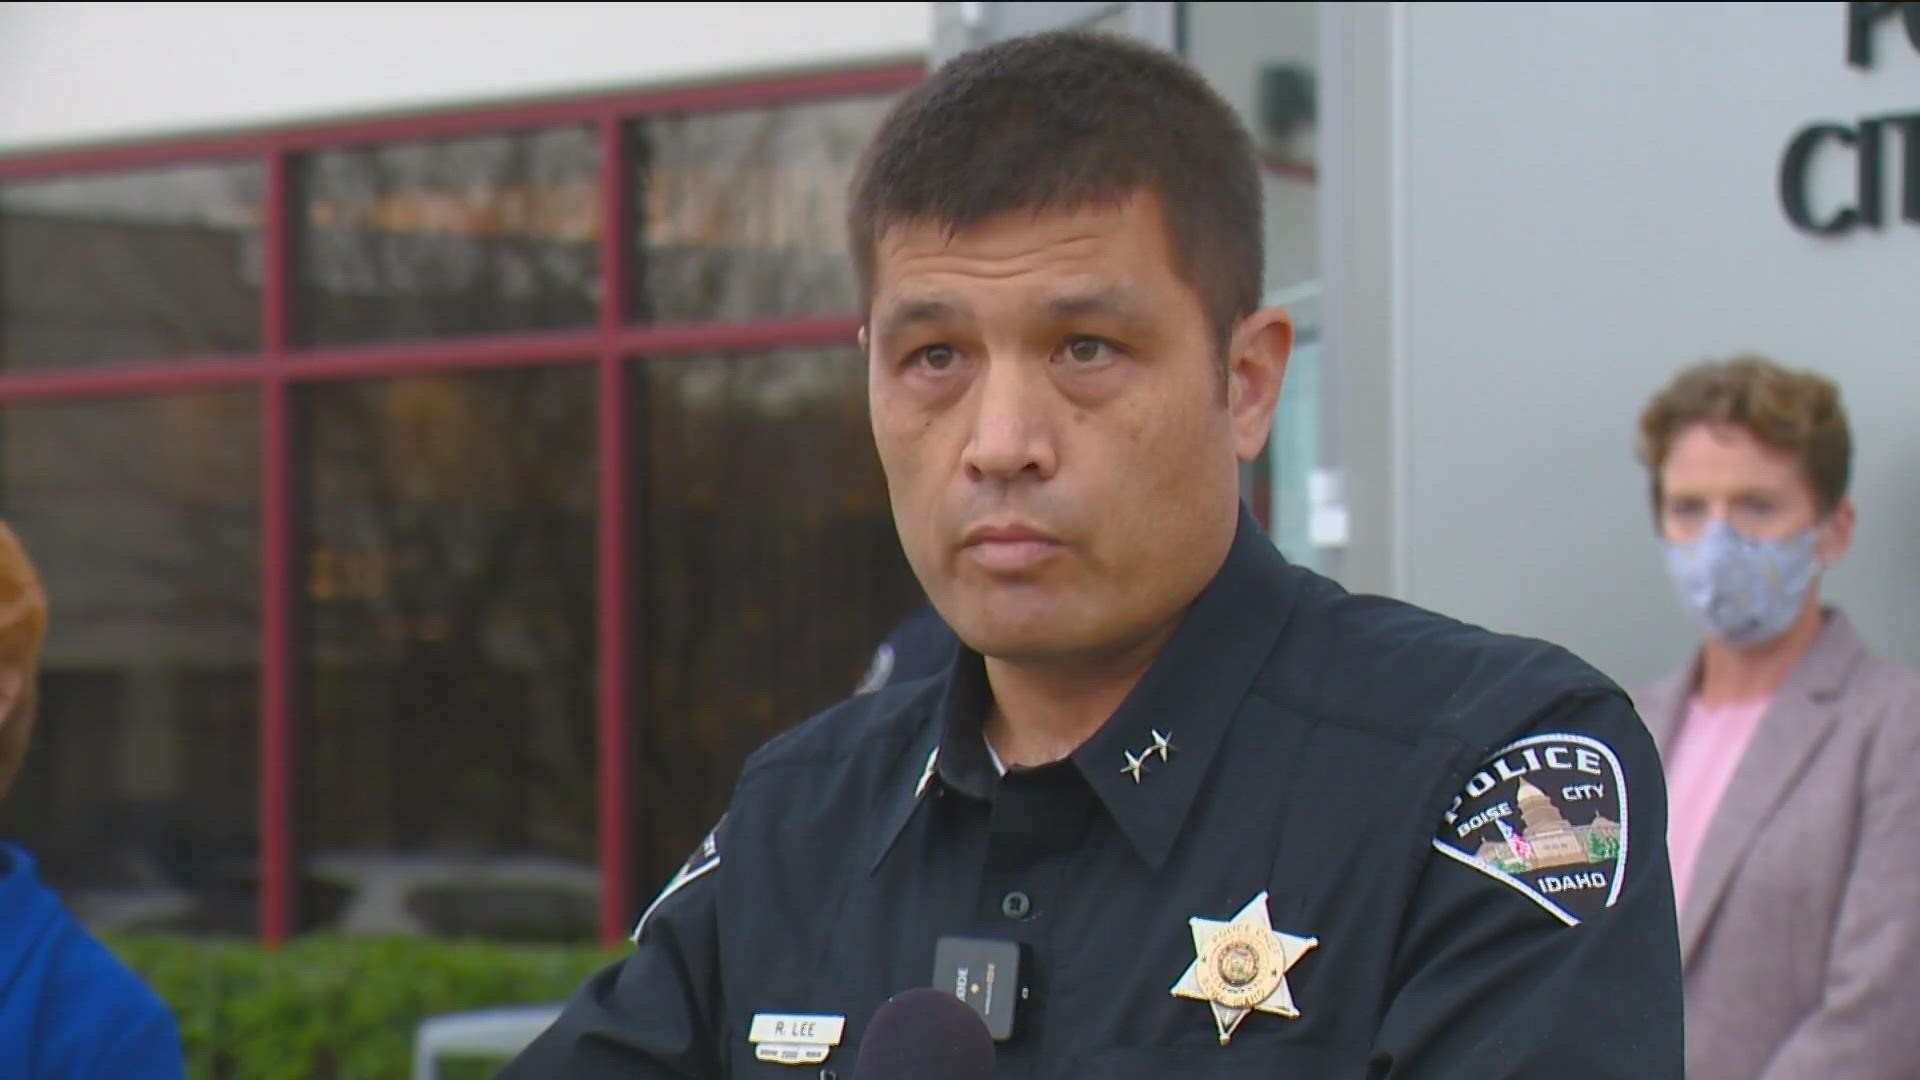 Former Boise Police chief Ryan Lee, who was asked to resign at the request of Boise Mayor Lauren McLean, is among other applicants for the Toledo PD chief.